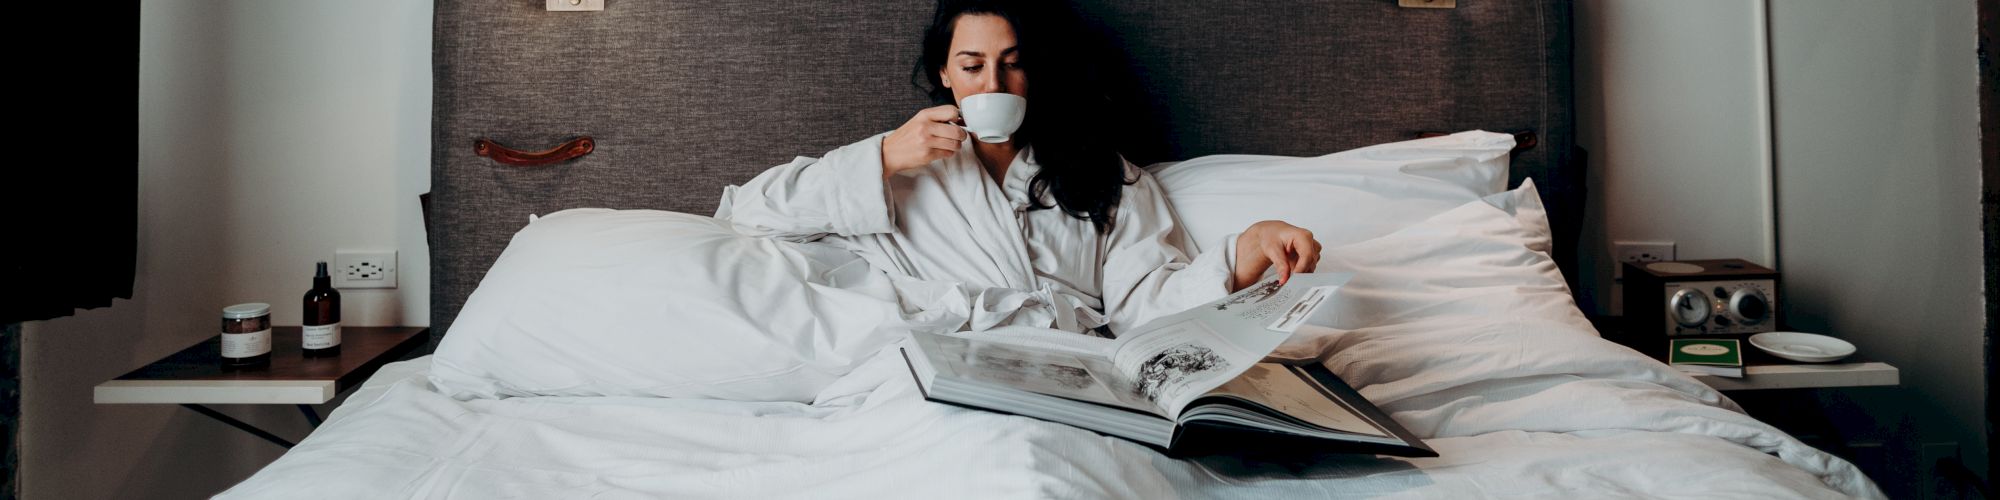 A person sits in bed drinking from a cup and reading a magazine, under modern art, with bedside lights turned on.